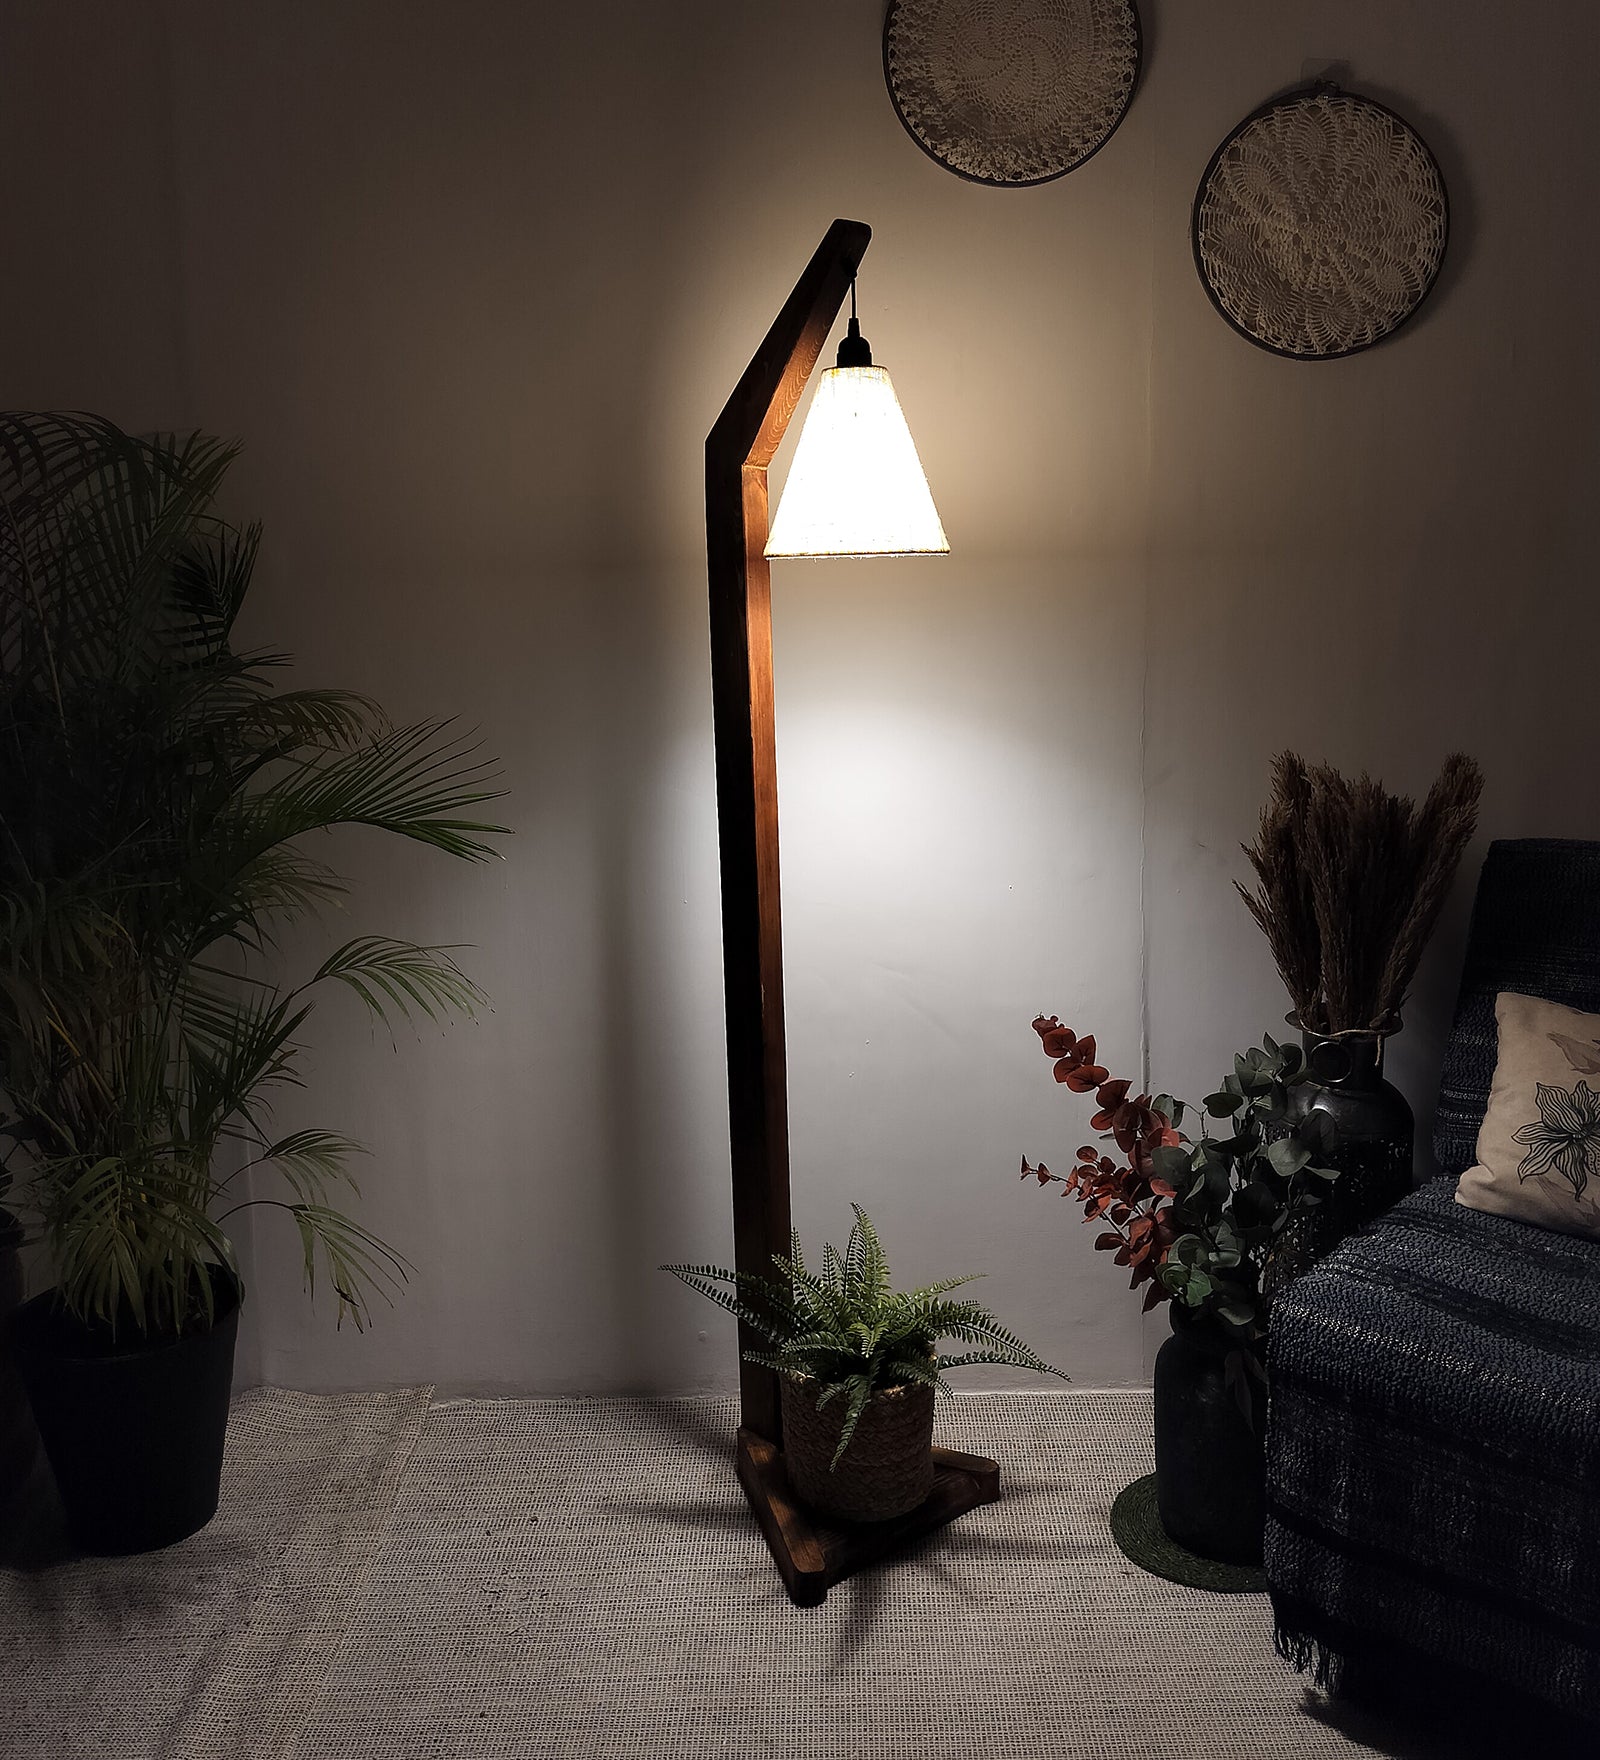 Charles Wooden Floor Lamp with Brown Base and Jute Fabric Lampshade (BULB NOT INCLUDED)